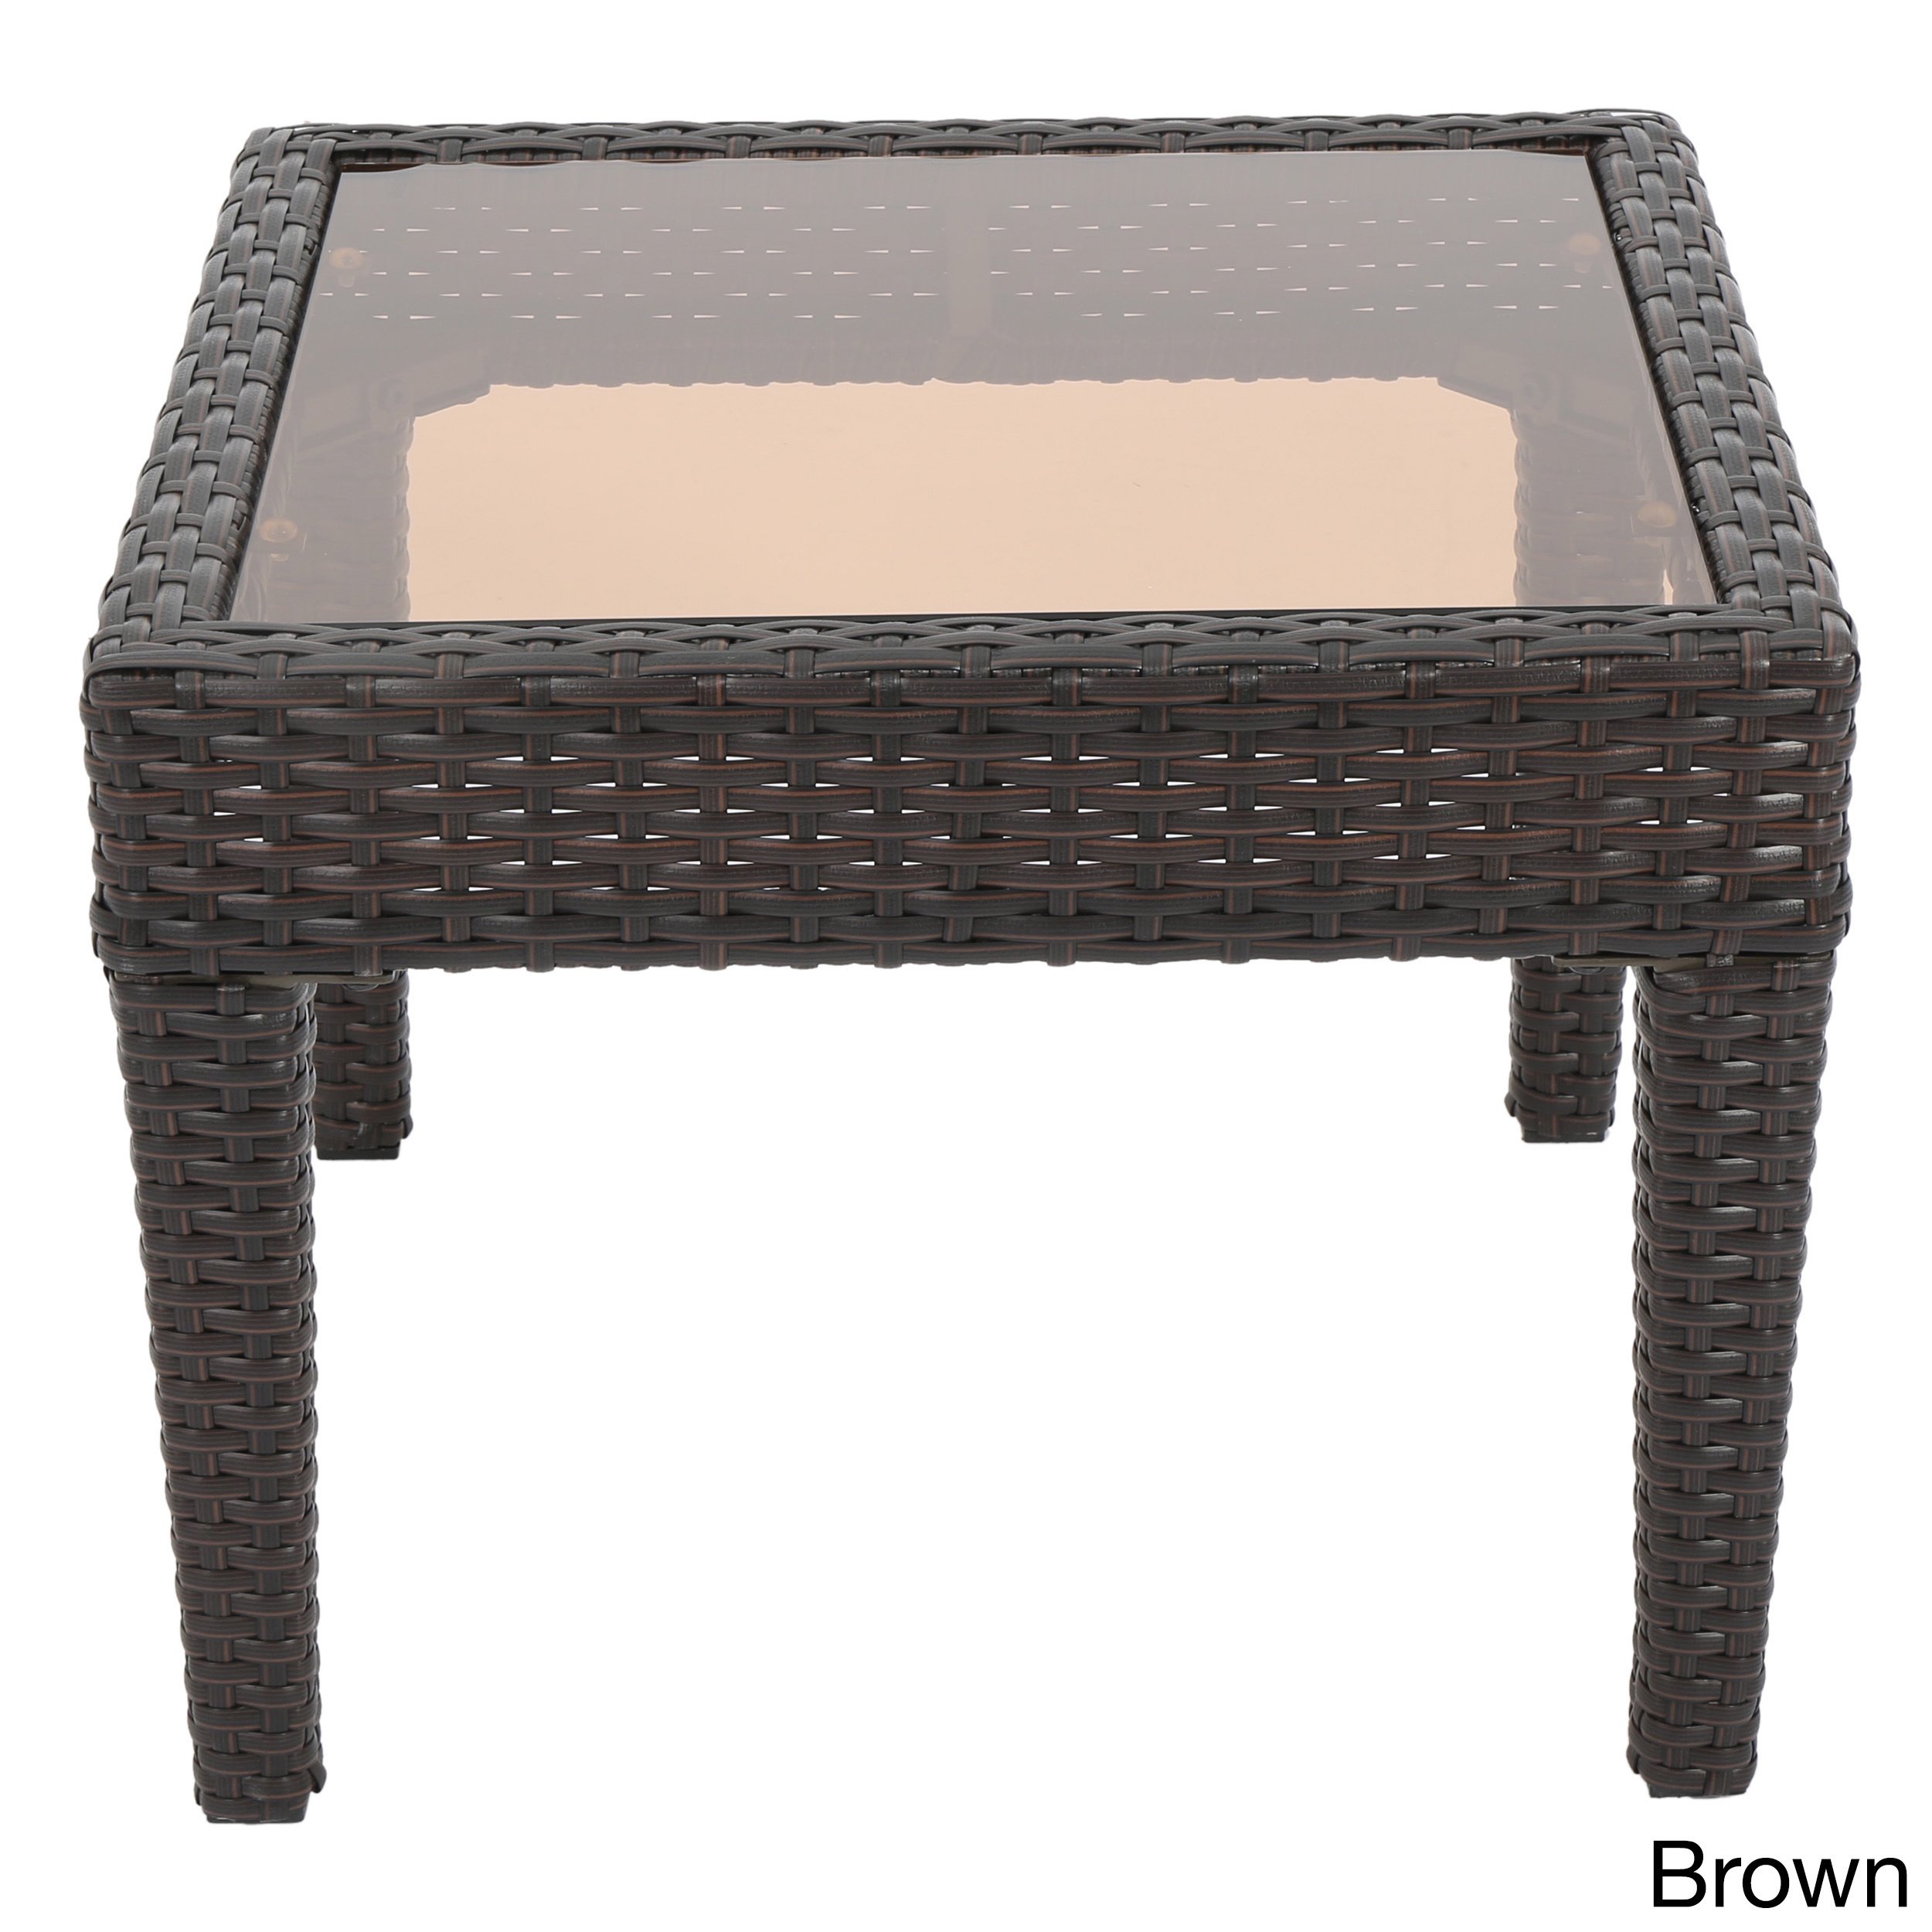 outdoor antibes wicker side table christopher knight home brown free shipping today ballard designs chair cushions kade accent pottery barn furniture glass lamps for bedroom rod